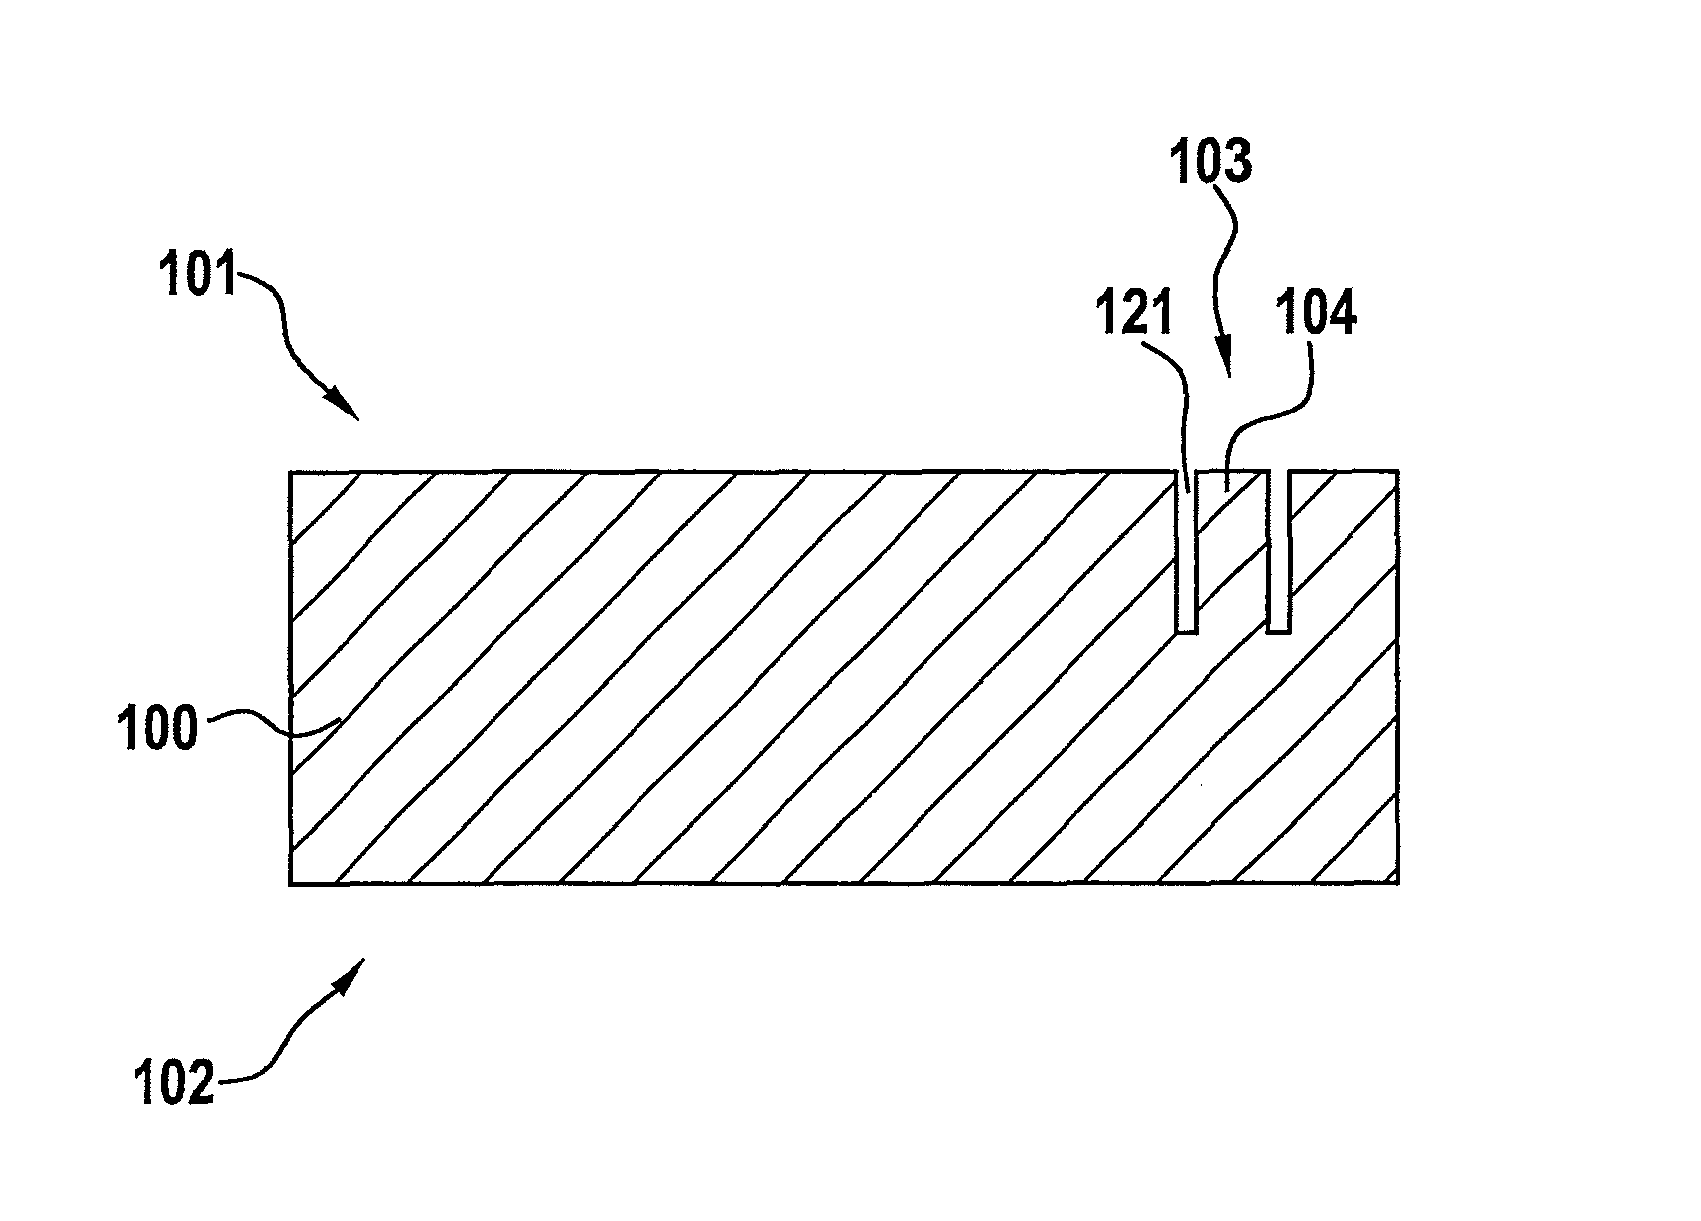 Method for manufacturing a component having an electrical through-connection